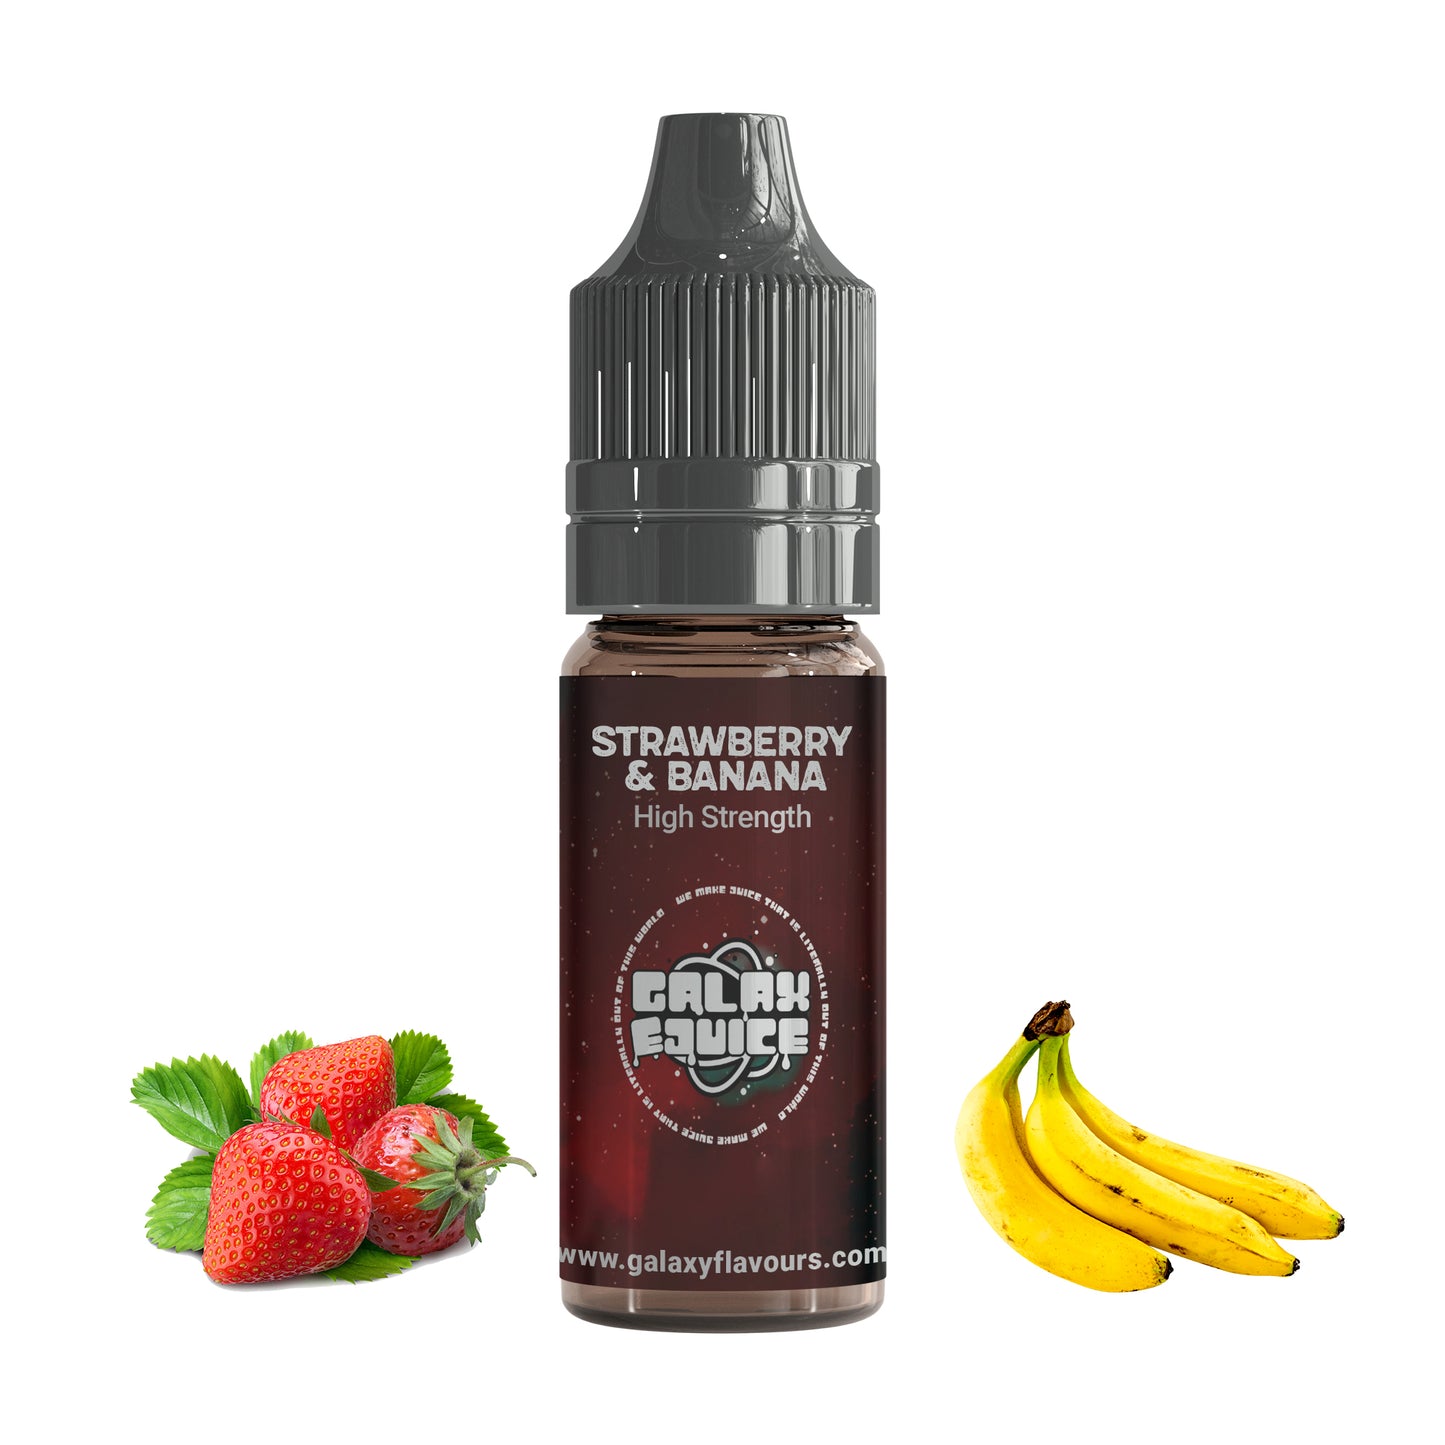 Strawberry and Banana High Strength Professional Flavouring.